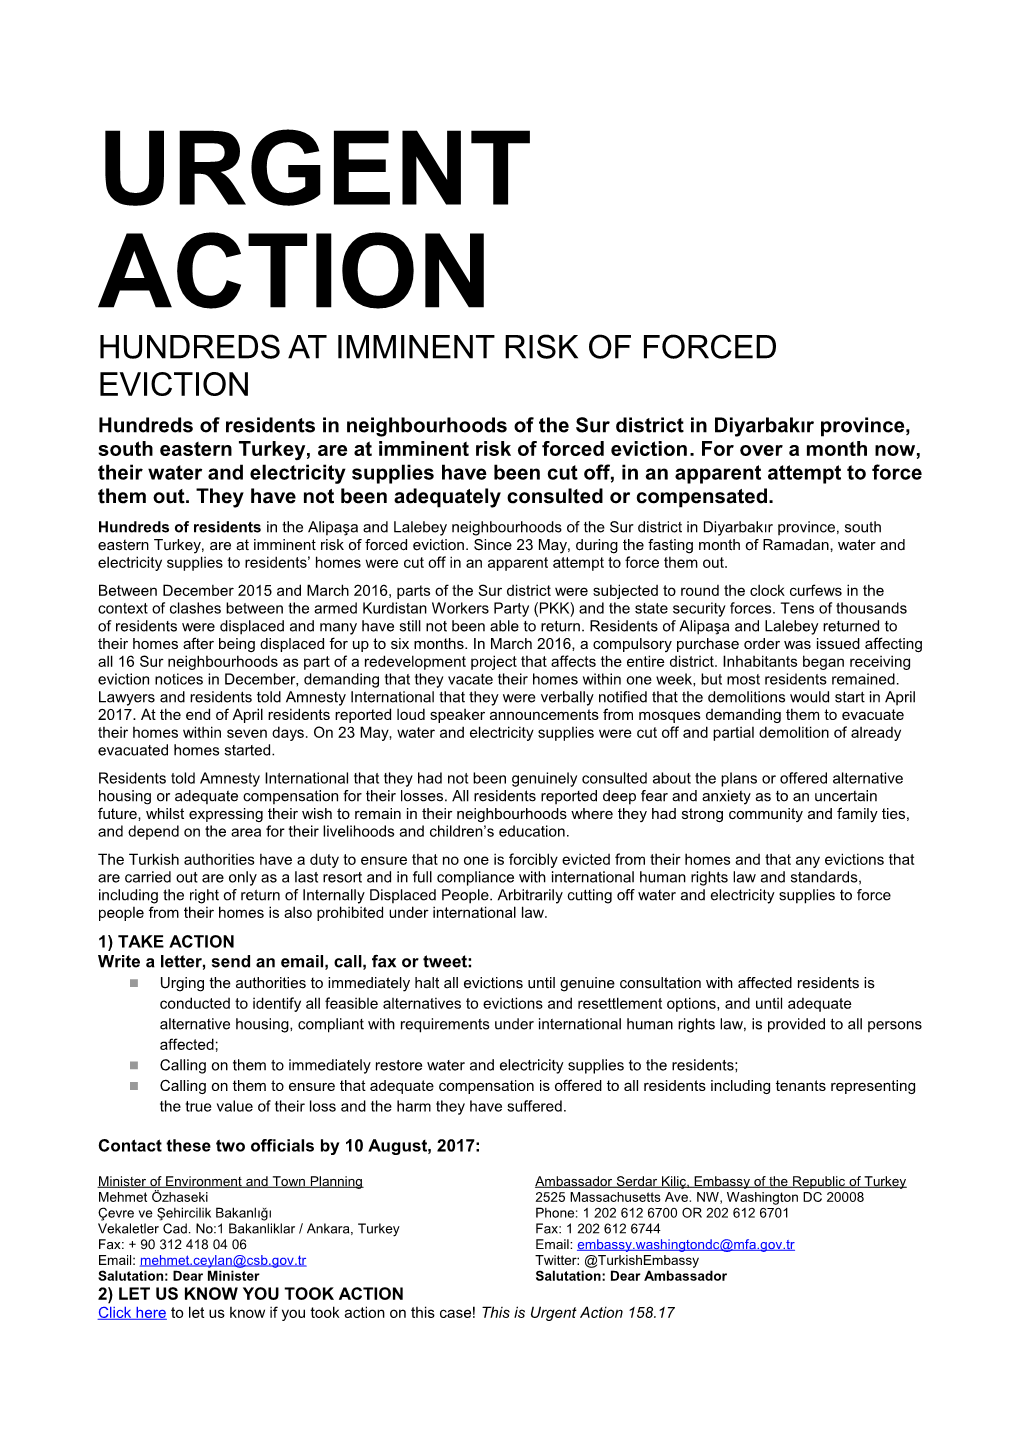 Hundreds at Imminent Risk of Forced Eviction